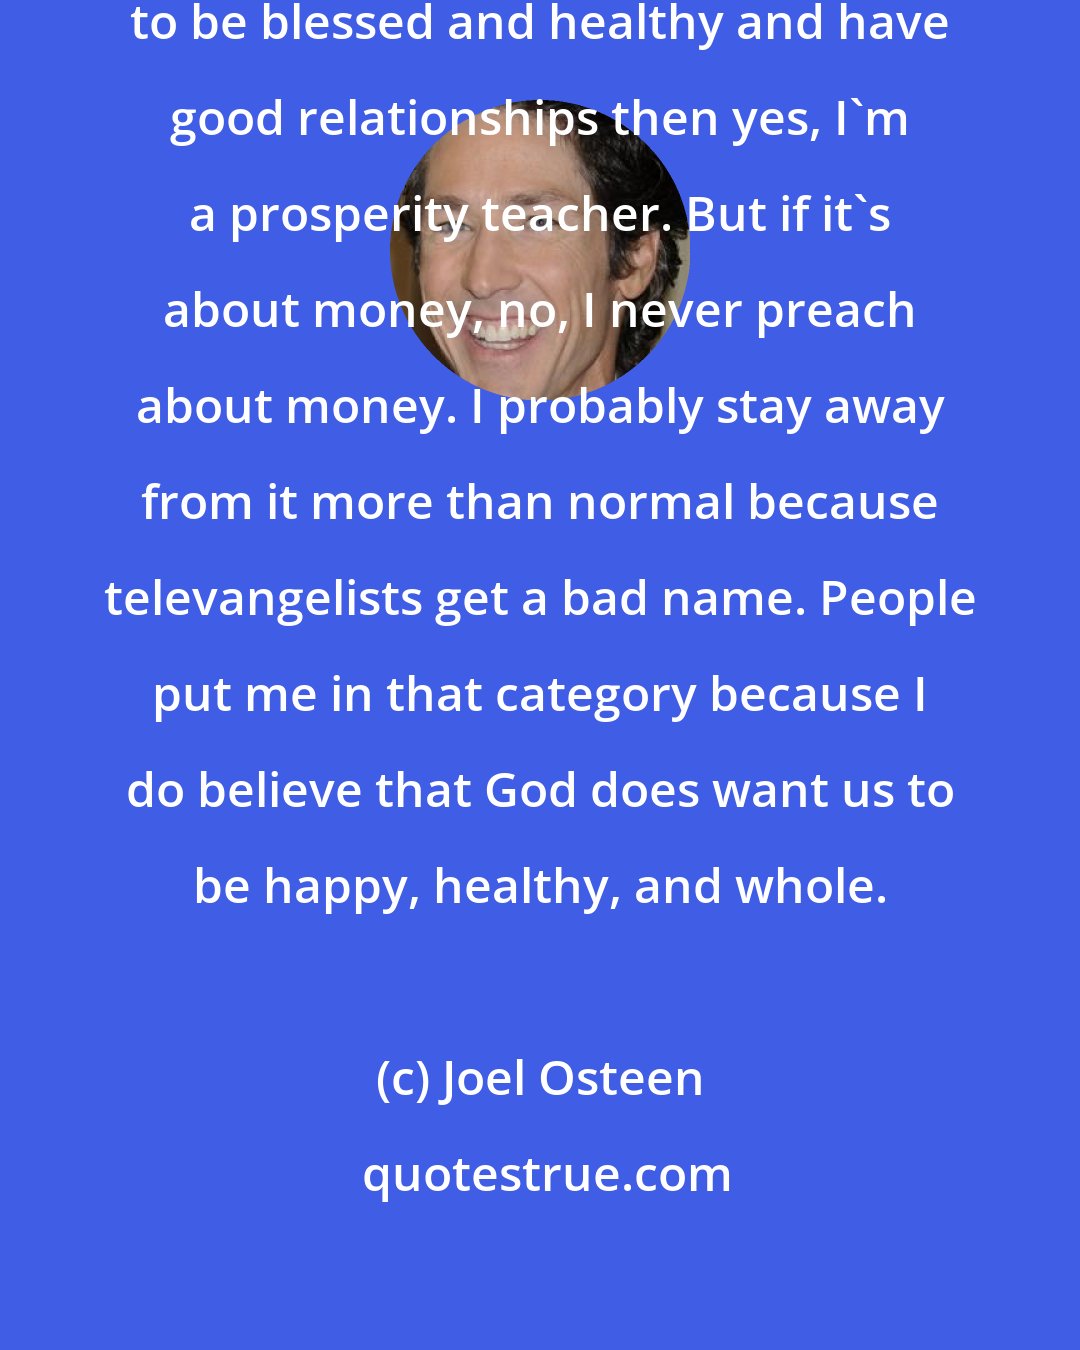 Joel Osteen: If prosperity means God wants us to be blessed and healthy and have good relationships then yes, I'm a prosperity teacher. But if it's about money, no, I never preach about money. I probably stay away from it more than normal because televangelists get a bad name. People put me in that category because I do believe that God does want us to be happy, healthy, and whole.